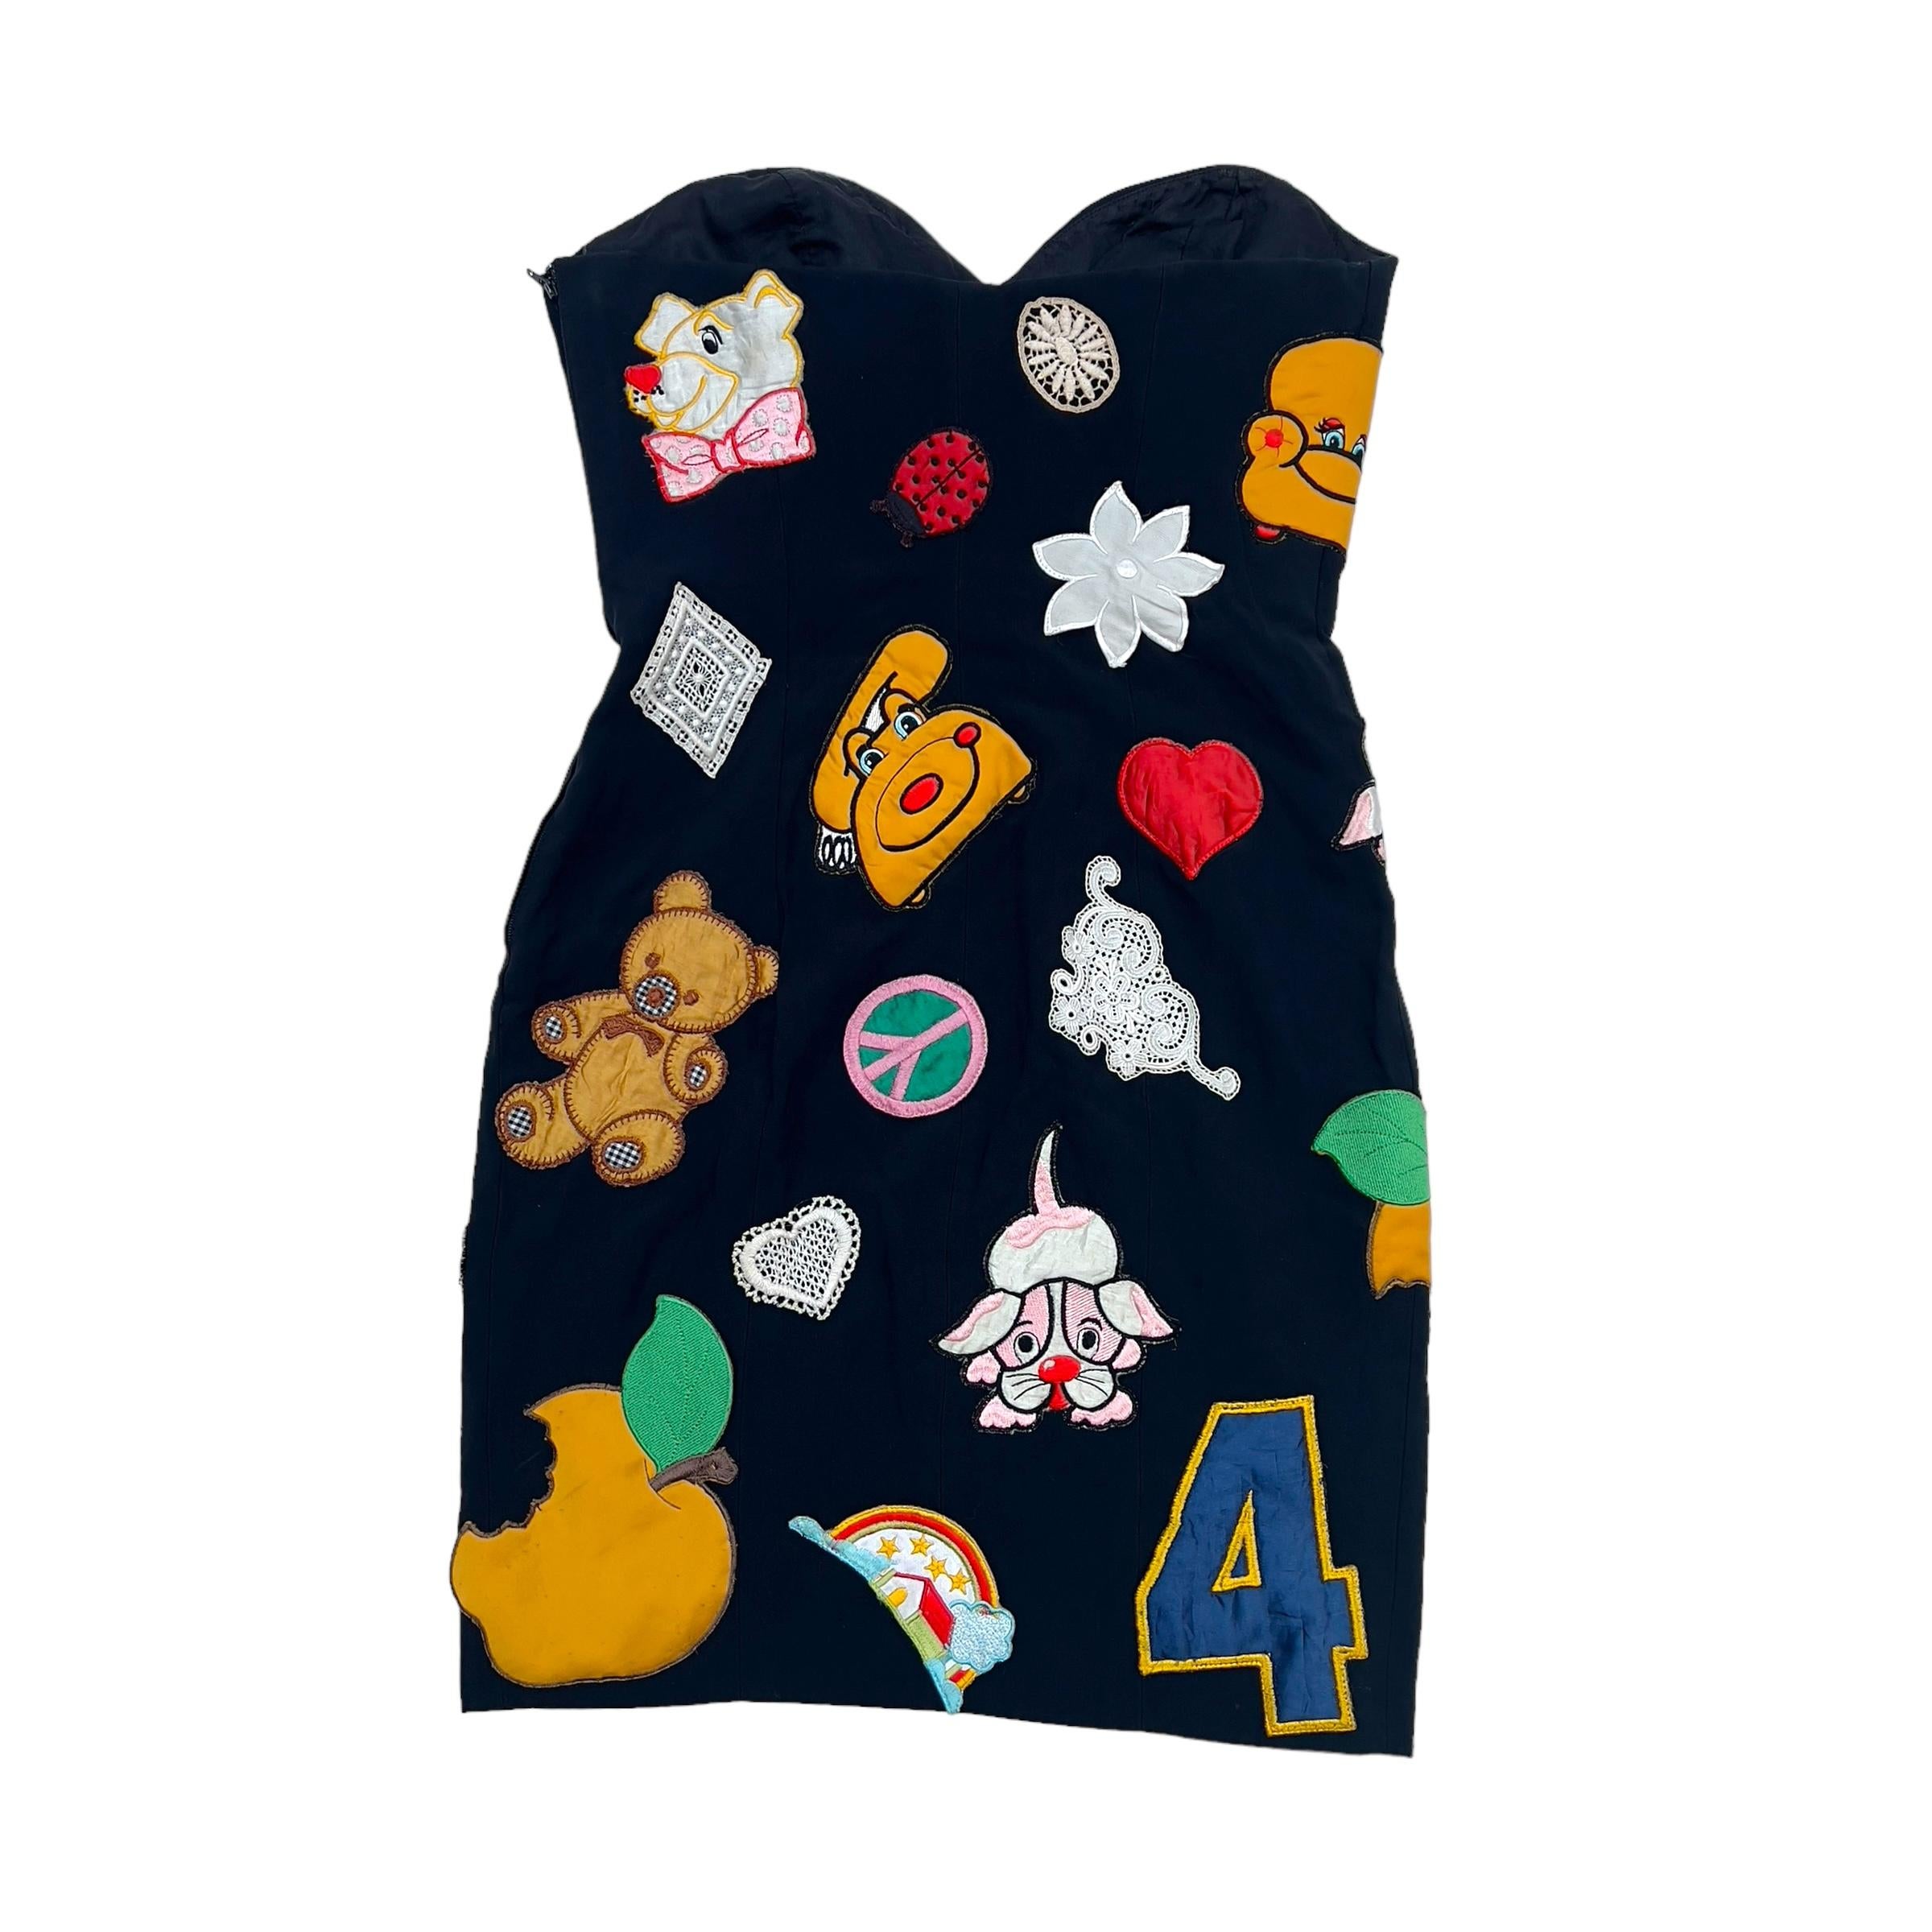 Vintage 1993 runway kiss my patch/ WHAM dress Moschino Couture. Moschino, the renowned Italian fashion brand founded by Franco Moschino, shocked the fashion world with its 1993 final collection titled 